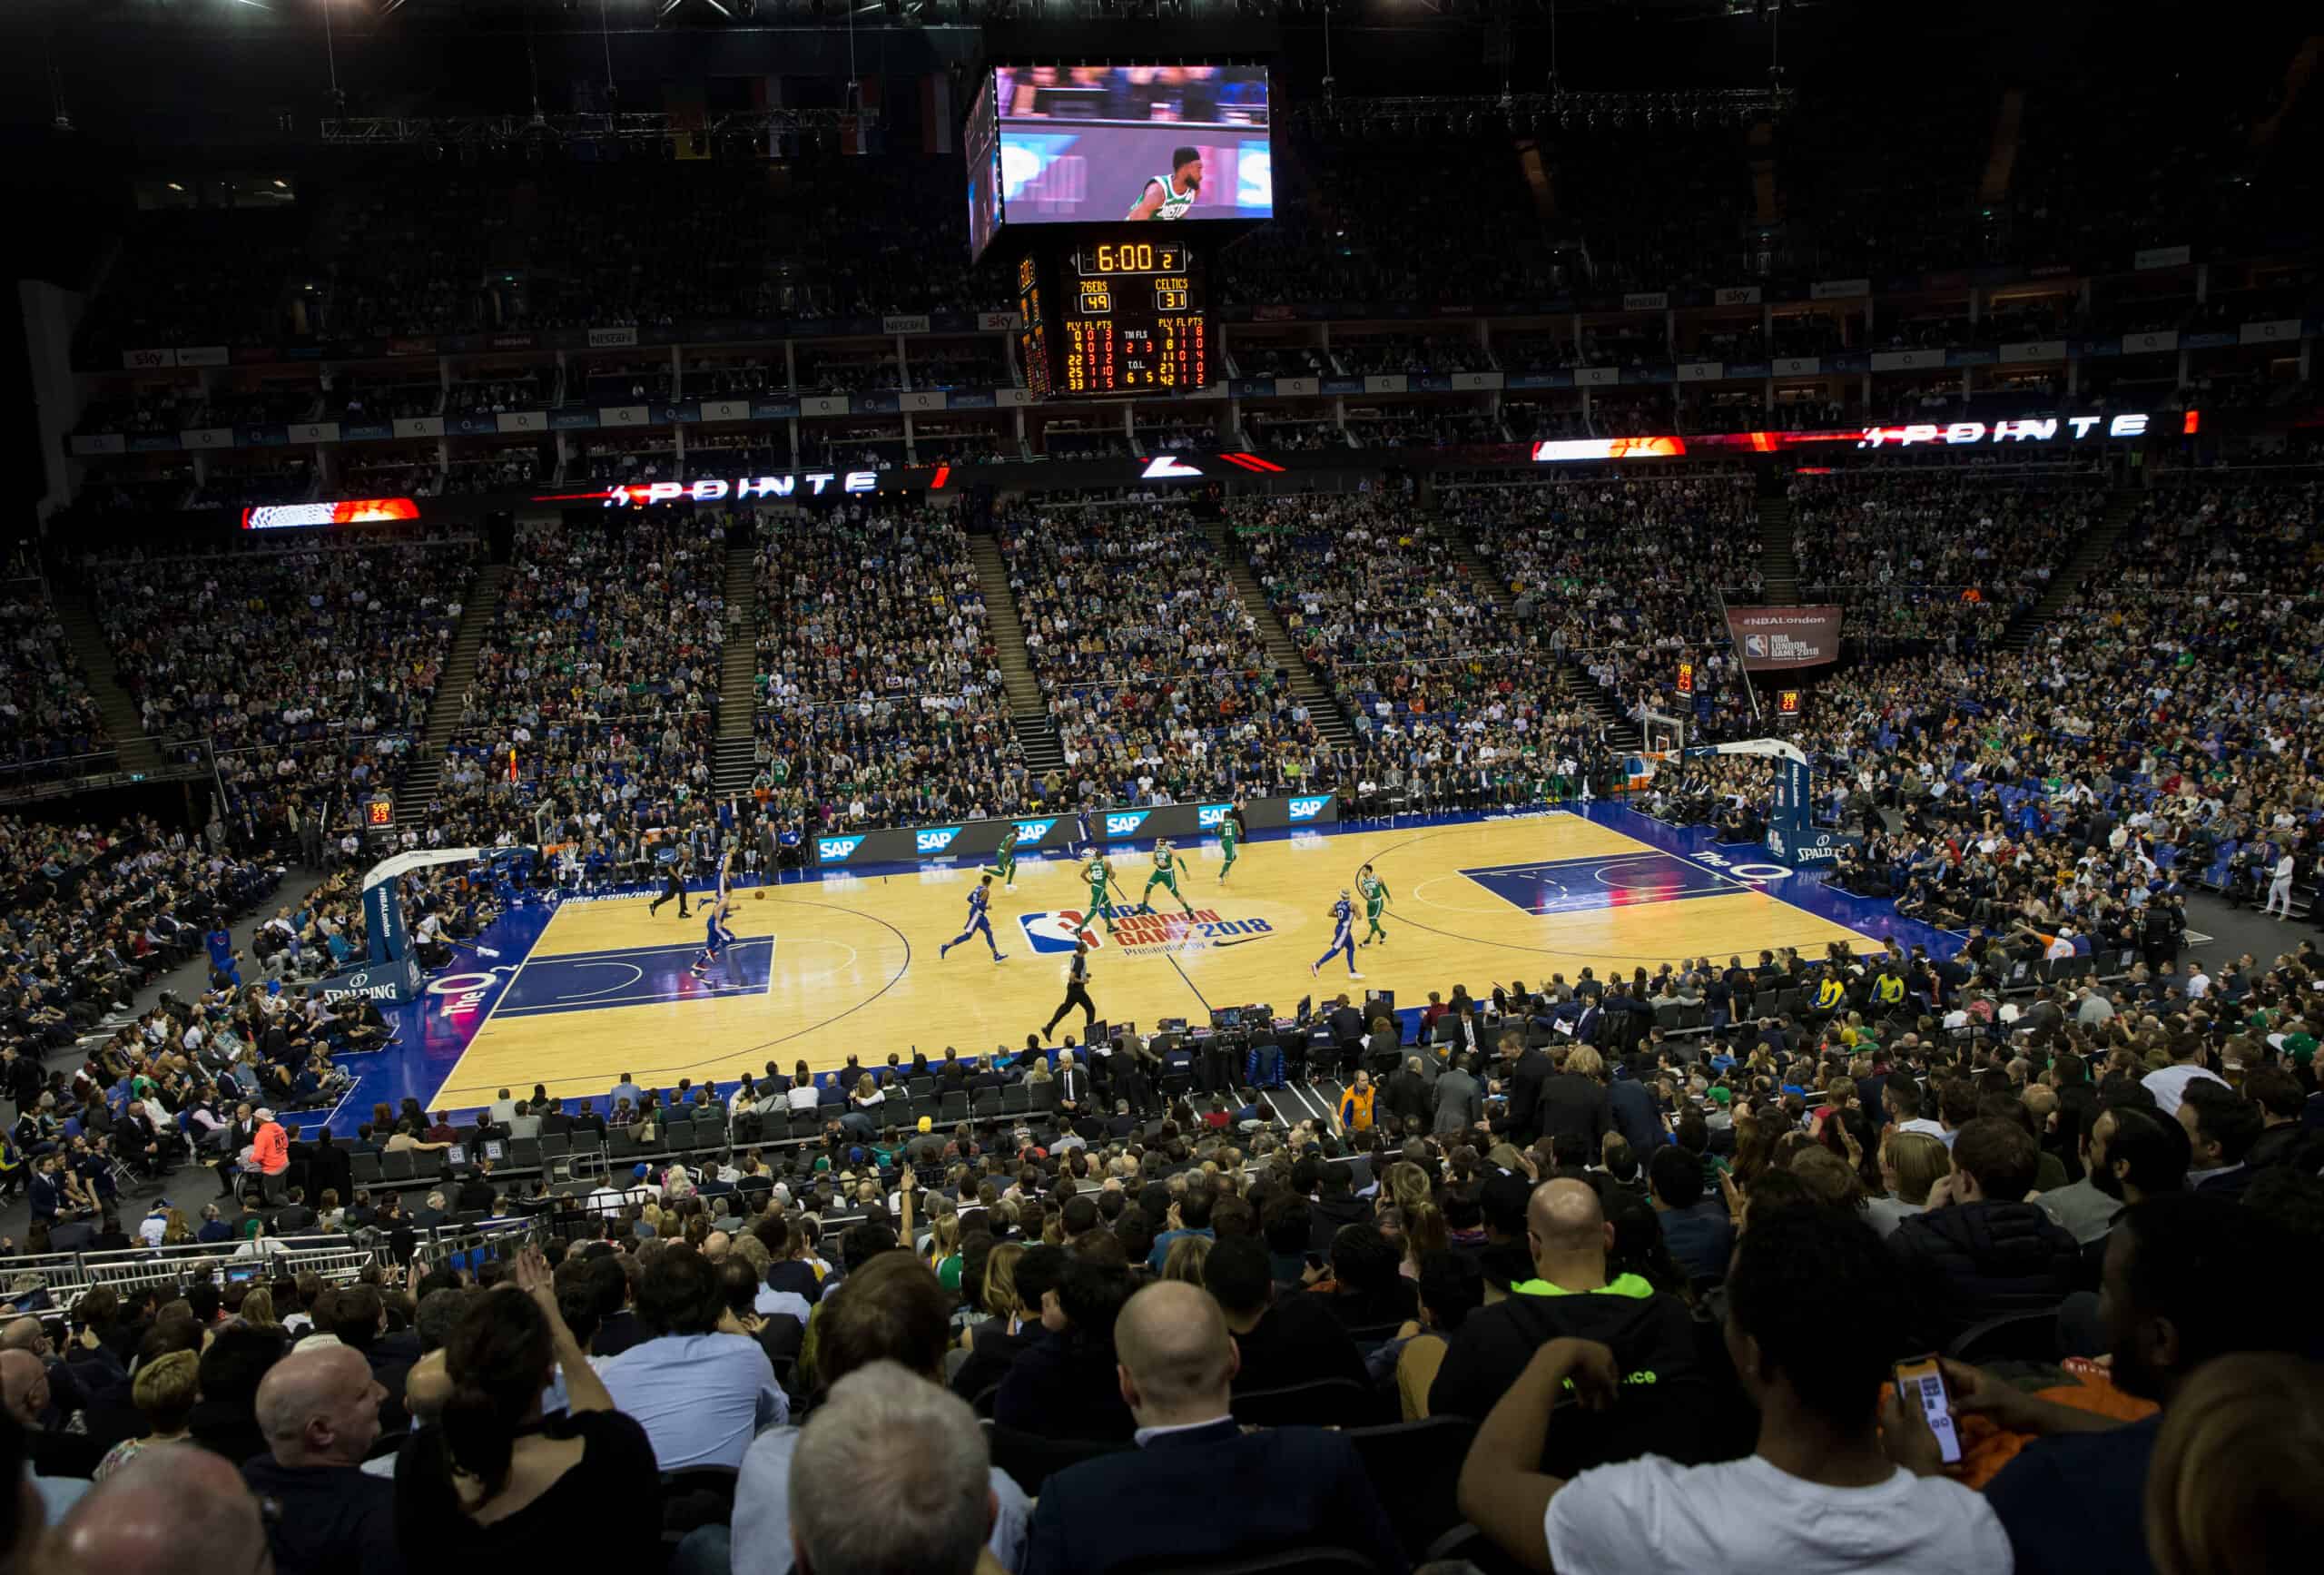 Fans spectate at The O2 Arena during the NBA London Game in 2018